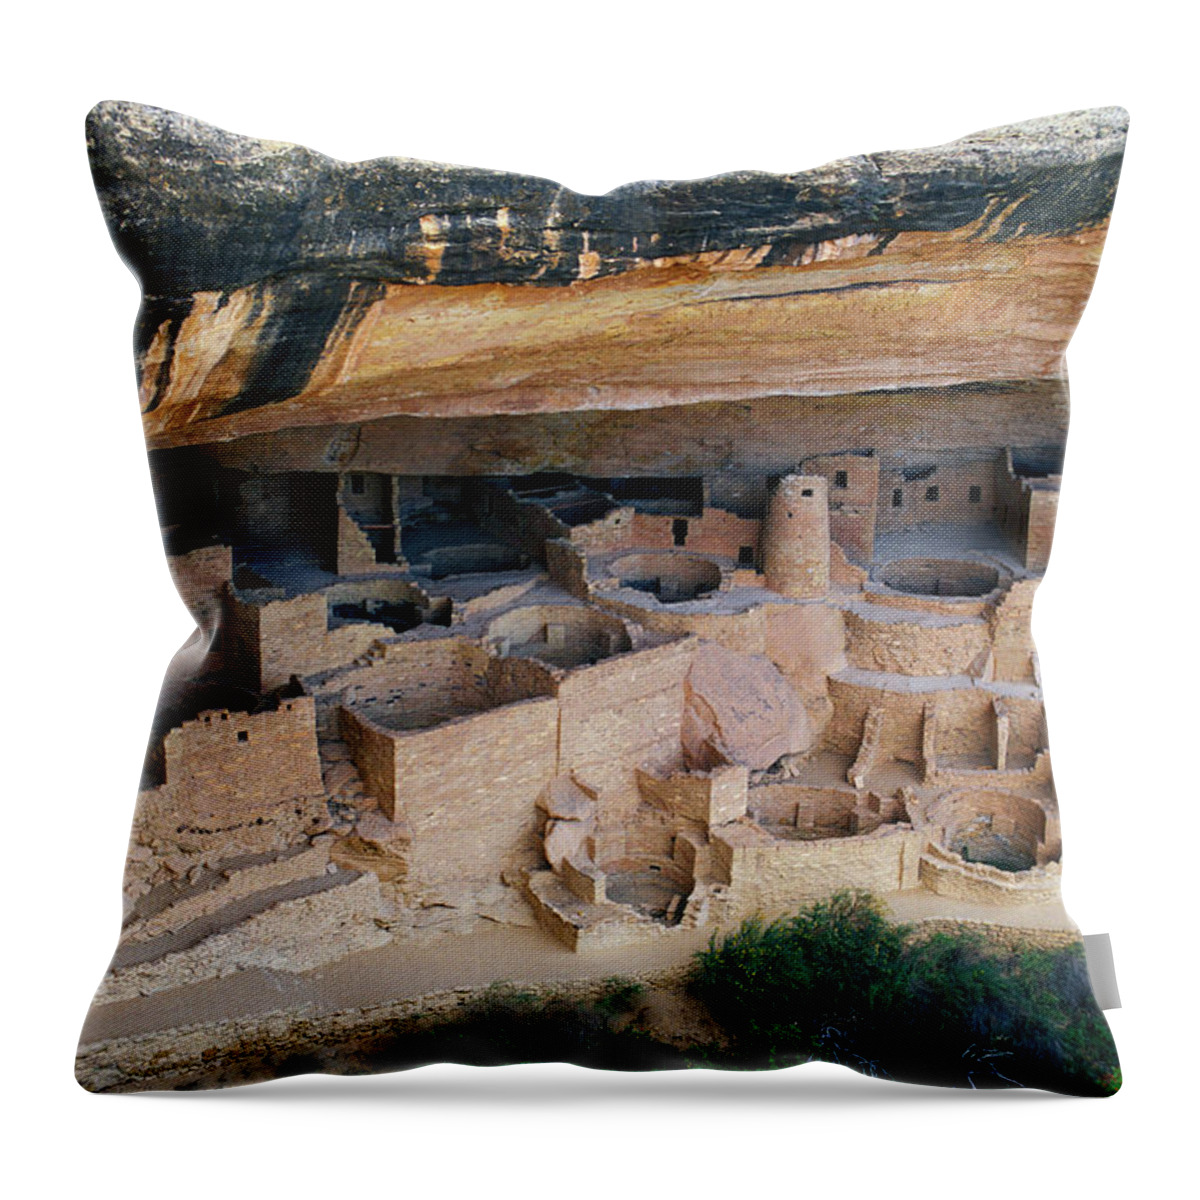 Mesa Verde National Park Throw Pillow featuring the photograph Cliff Palace Ruins by Mark Newman